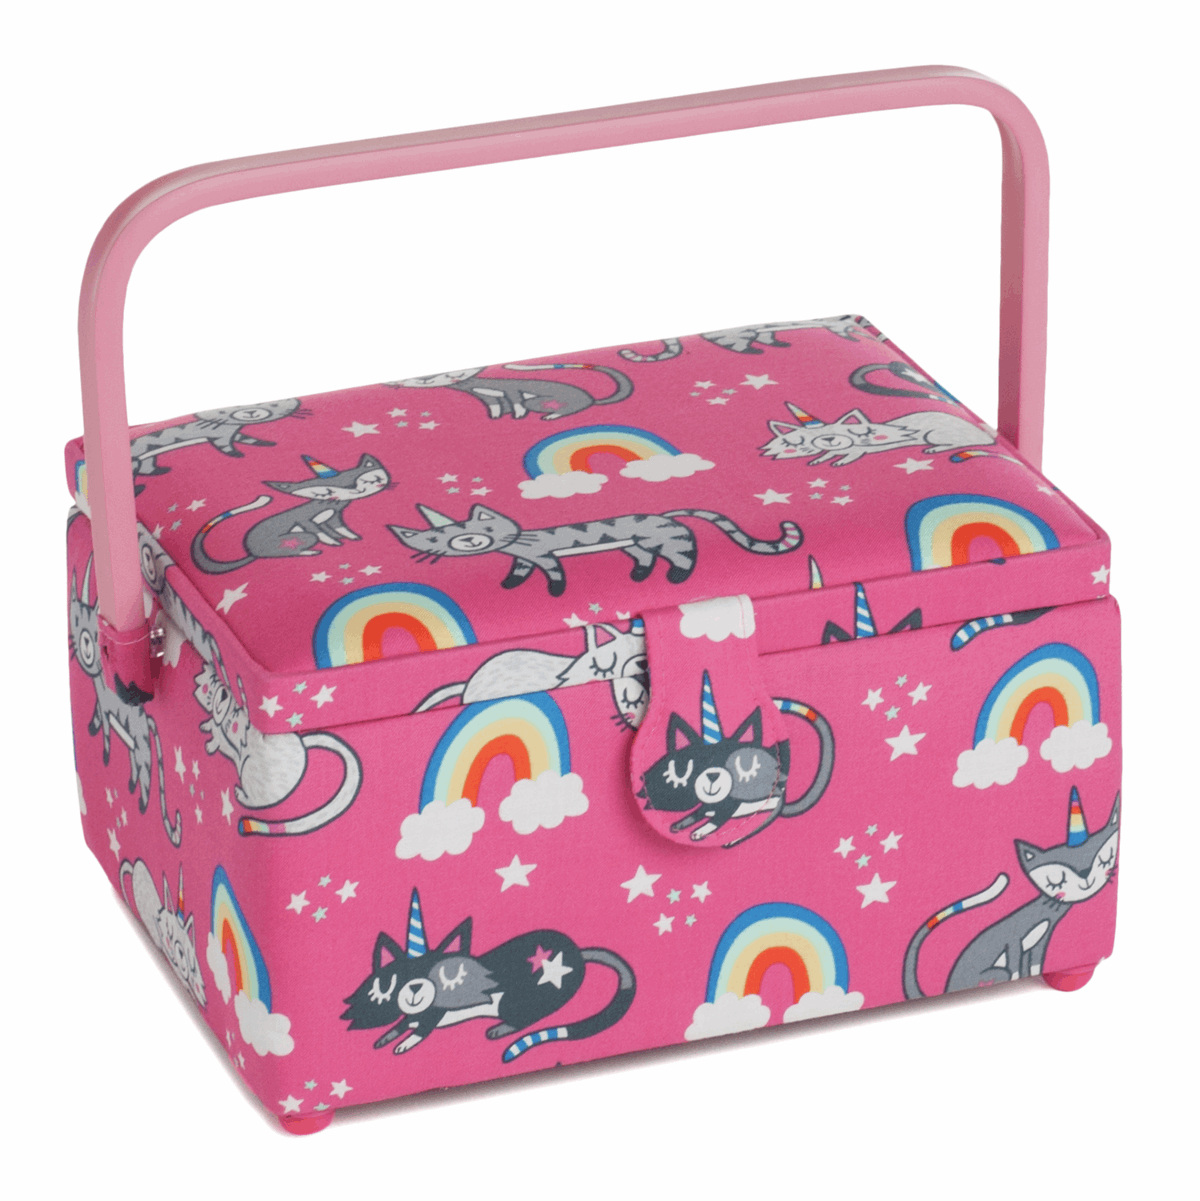 Caticorn Sewing Box with Handle - Large